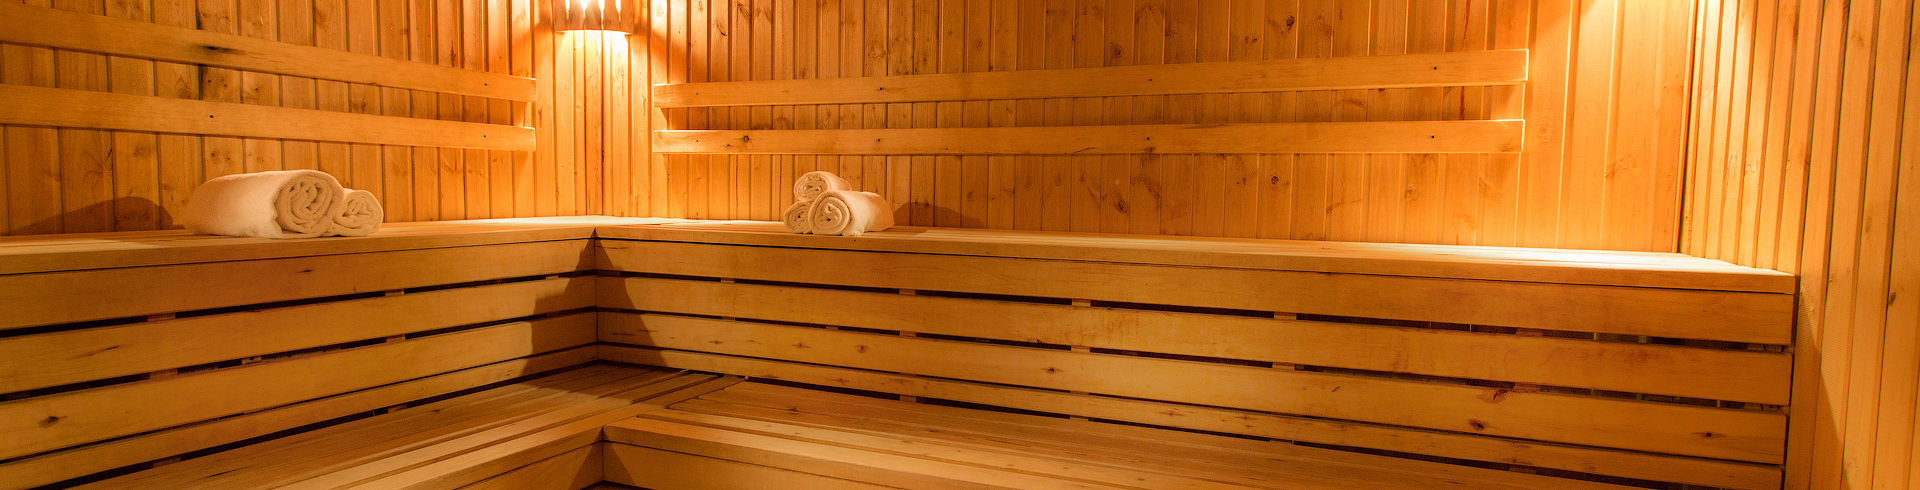 Essential Guidelines on How to Care and Maintain Your Sauna